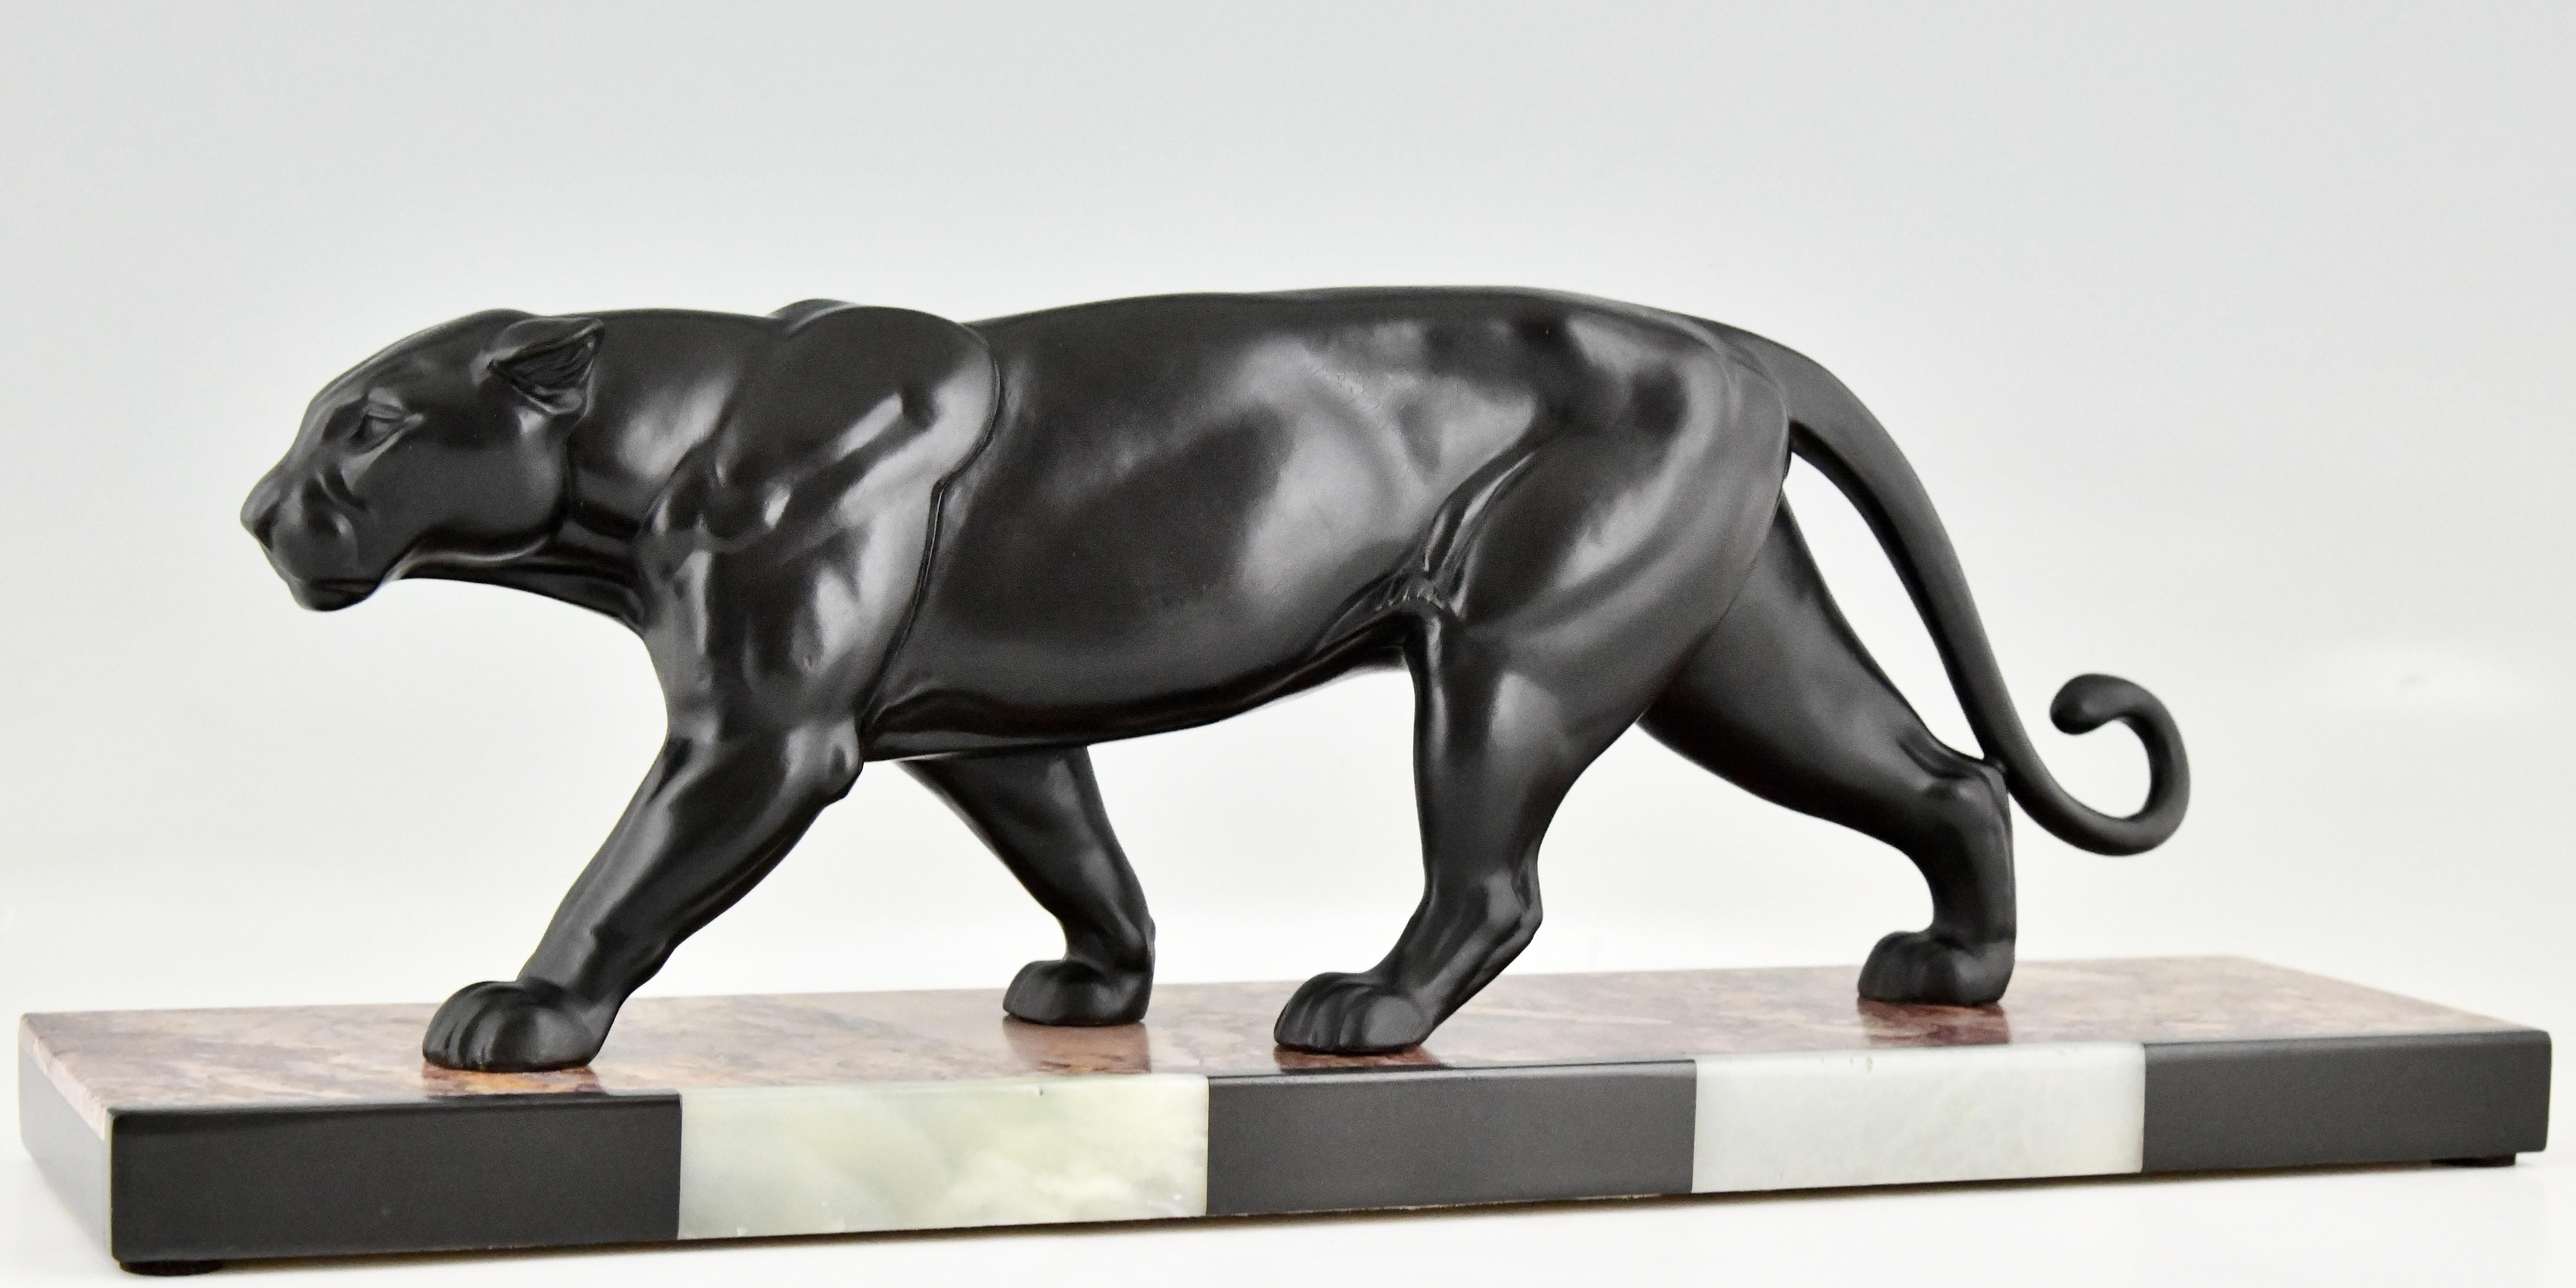 Art Deco sculpture of a panther by Alexandre Ouline.
The artist worked in France between 1918-1940.
The sculpture is cast in Art Metal and has a black patina, it stands on a marble base with inlay. 
France ca. 1930.

Animals in bronze by